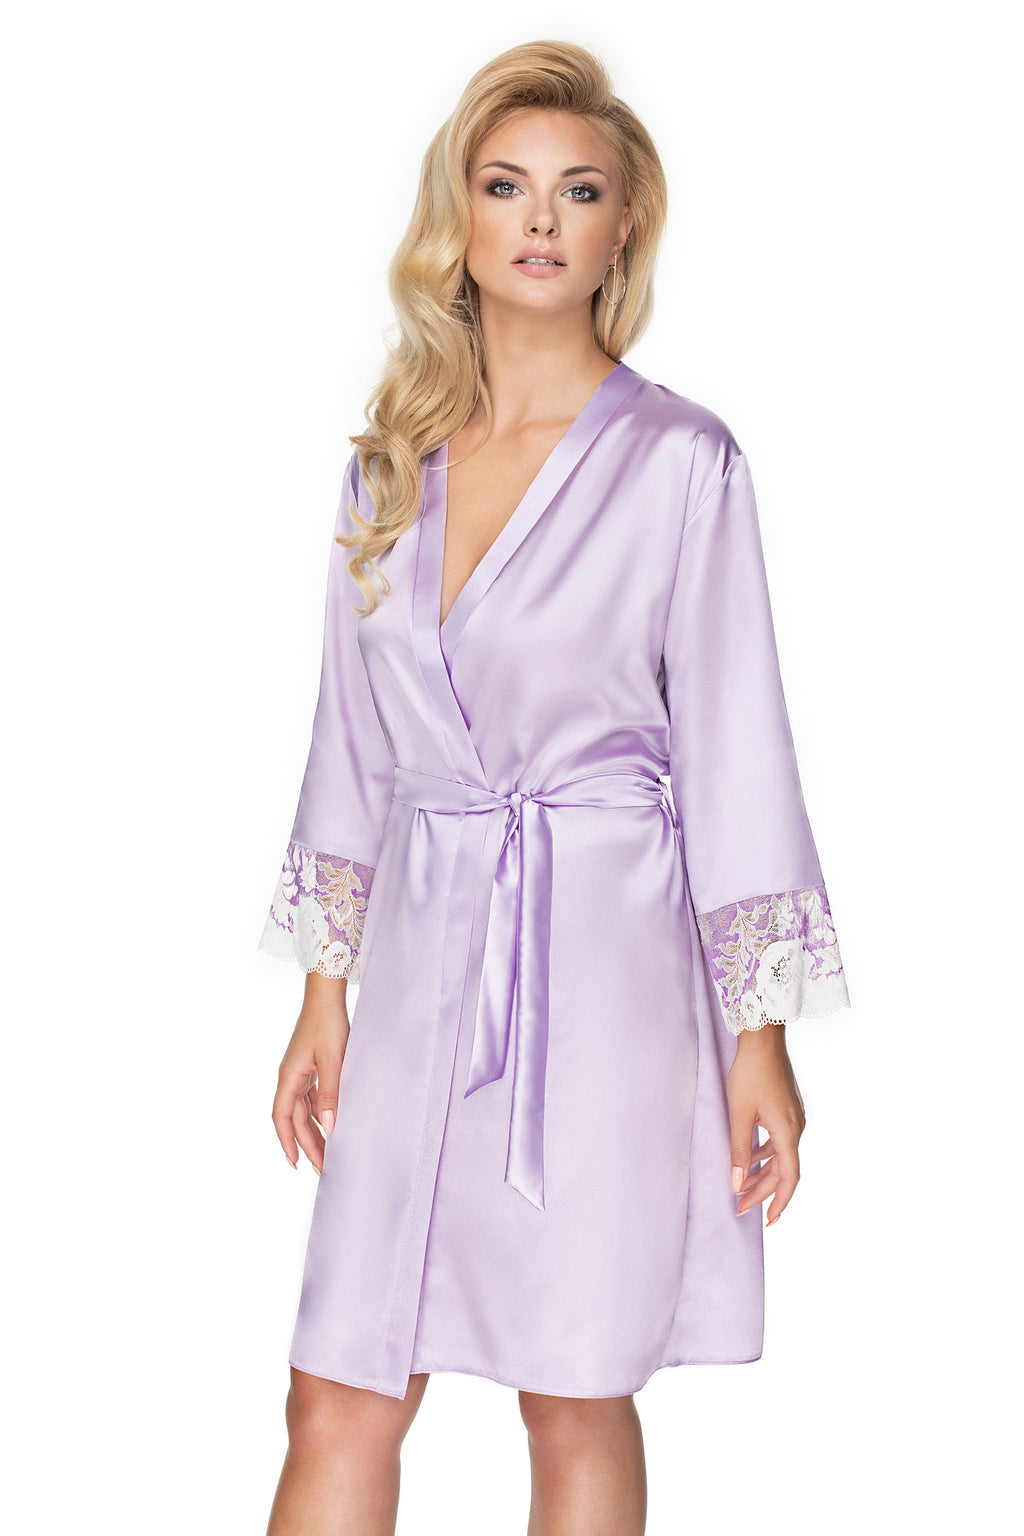 Irall Androeda Dressing Gown  Bedroom Wear, Brands, Irall, NEWLY-IMPORTED, Nightwear, Peignoirs, Robes - So Luxe Lingerie